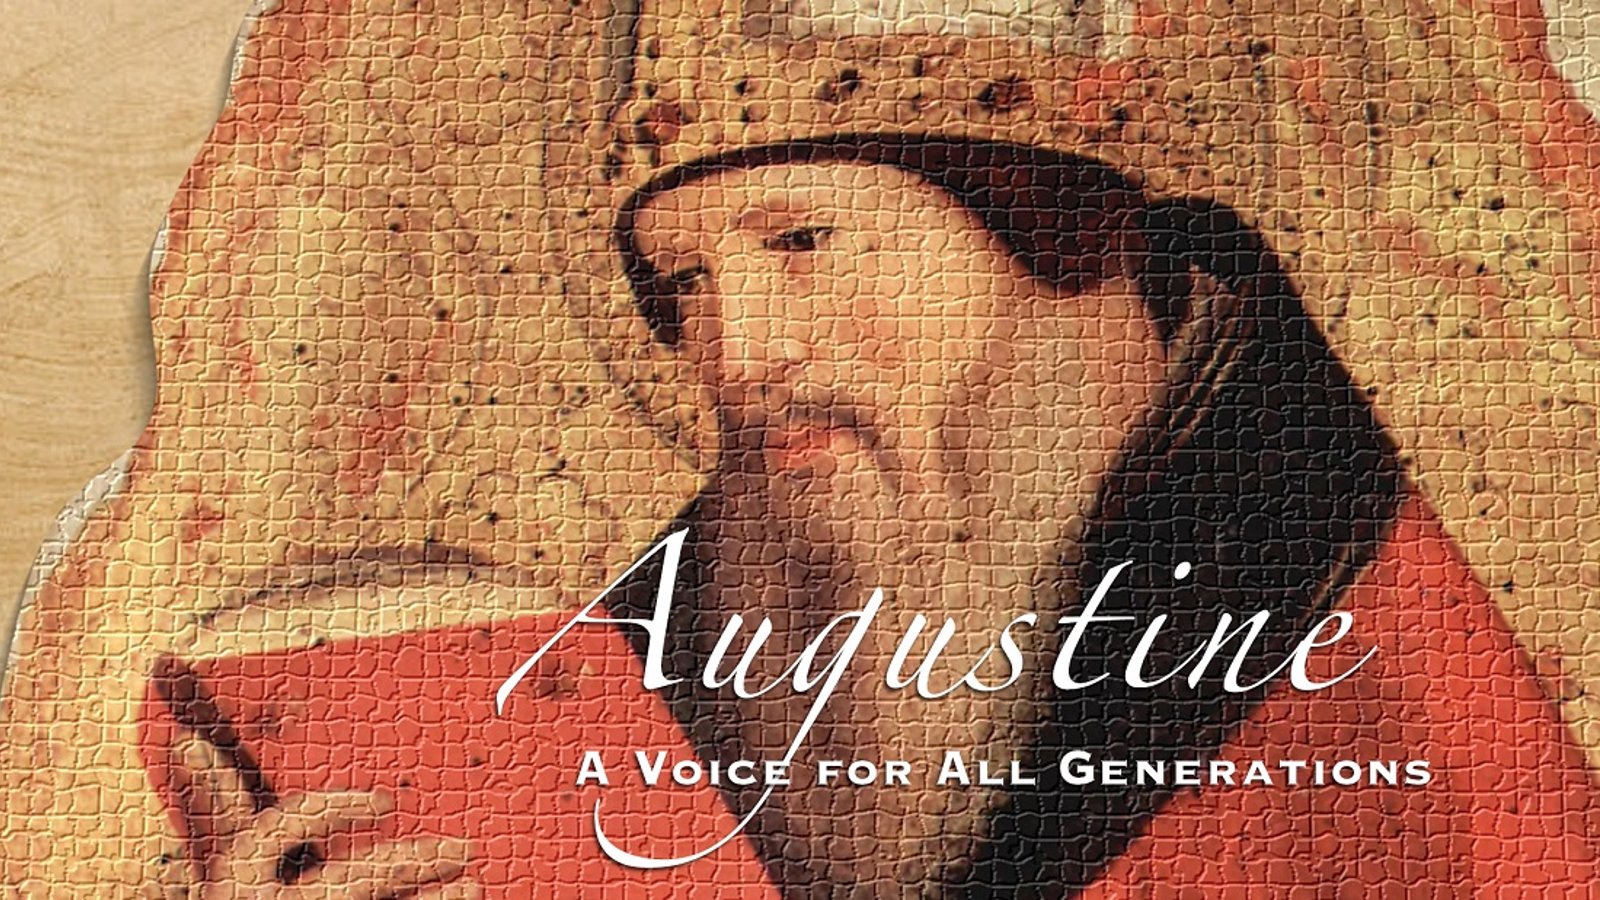 Augustine: A Voice for all Generations